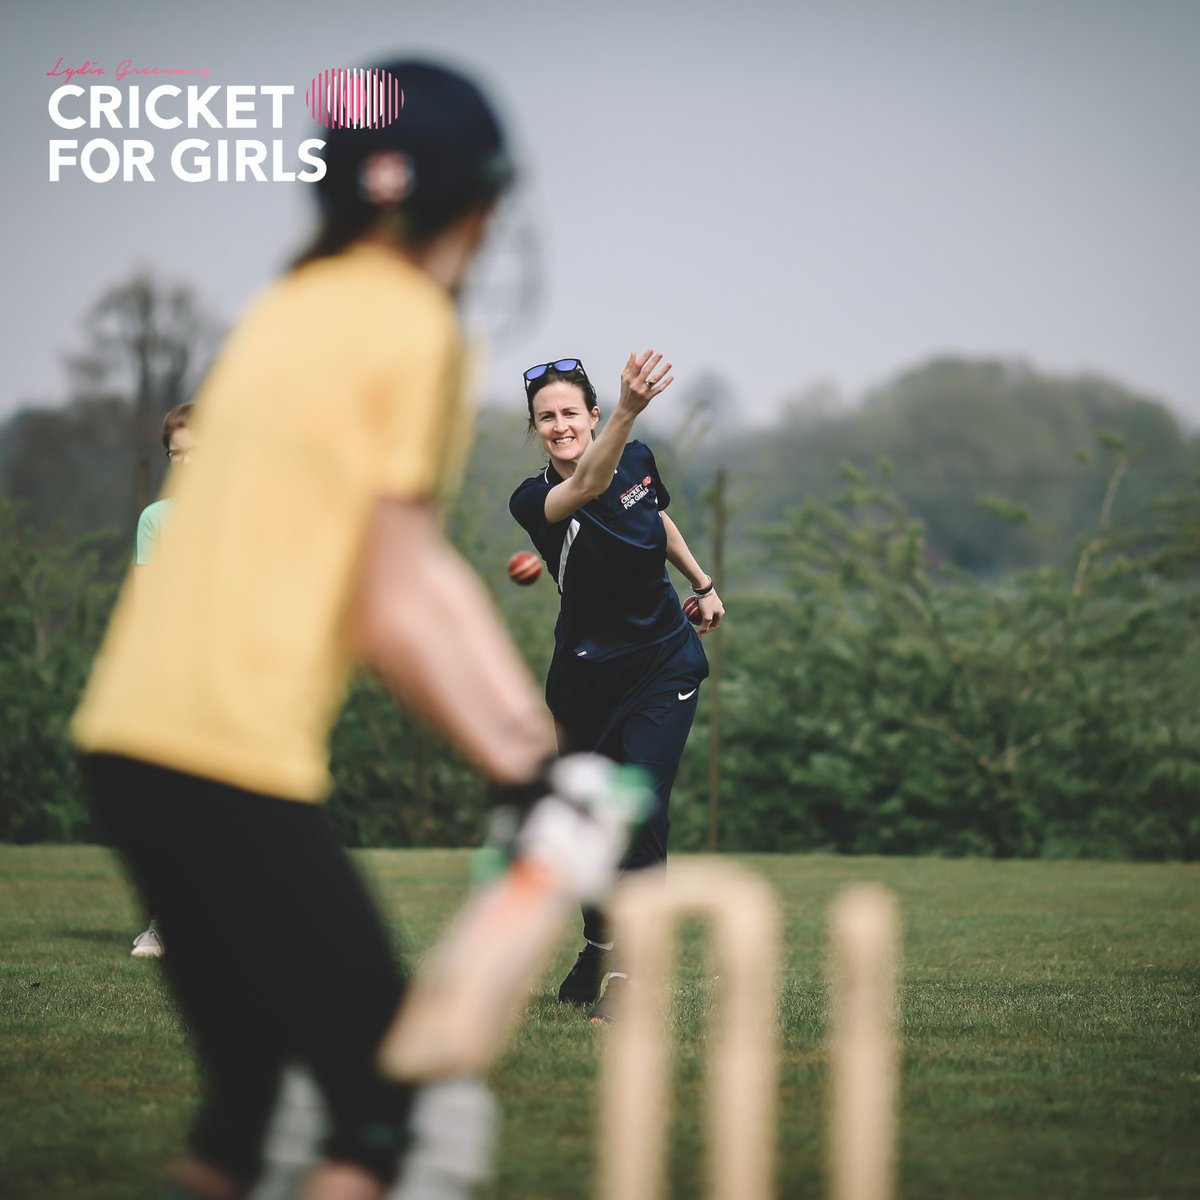 🏏 Wishing all our clubs and schools a fantastic Cricket Season ahead! 🌟 Remember, if there's anything we can do to support your journey, don't hesitate to reach out at cricketforgirls.com #CricketForGirls #Season2024